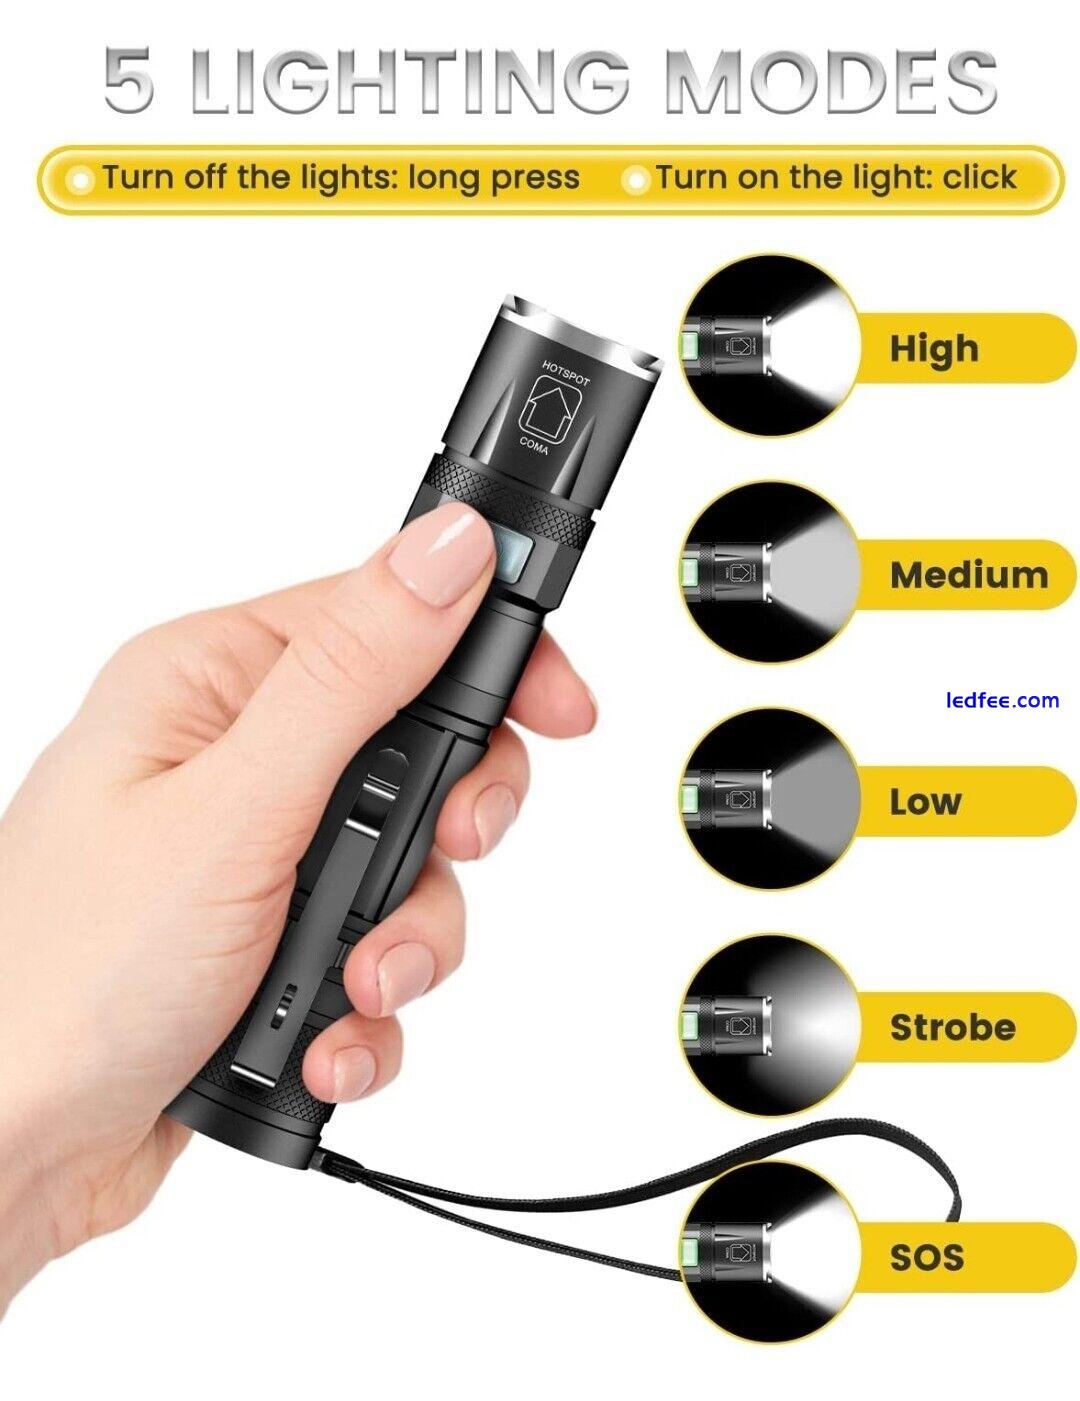 LED Torch 2000 Lumens Rechargeable Super Bright 5 Modes focus Waterproof Pocket 4 